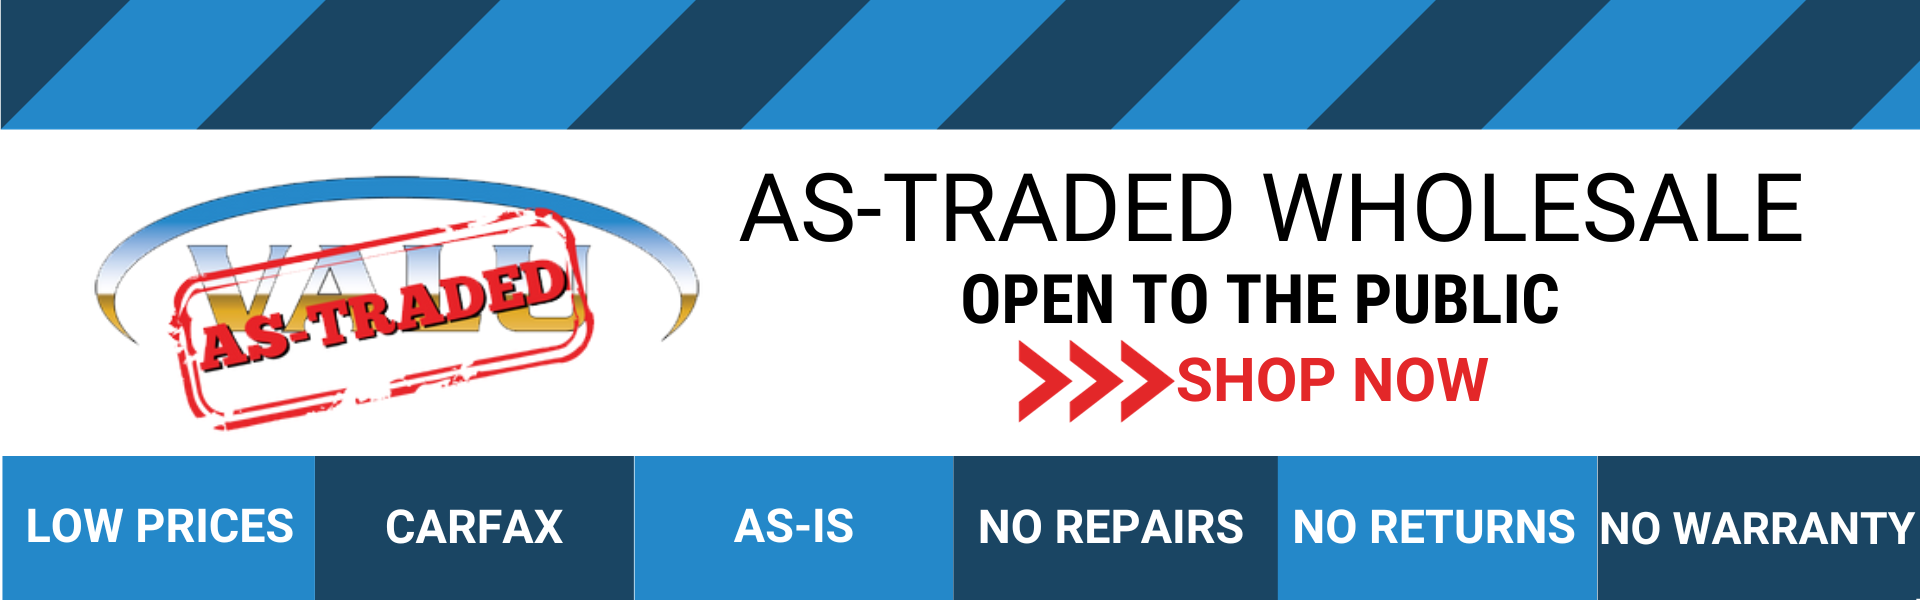 AS-TRADED WHOLESALE 